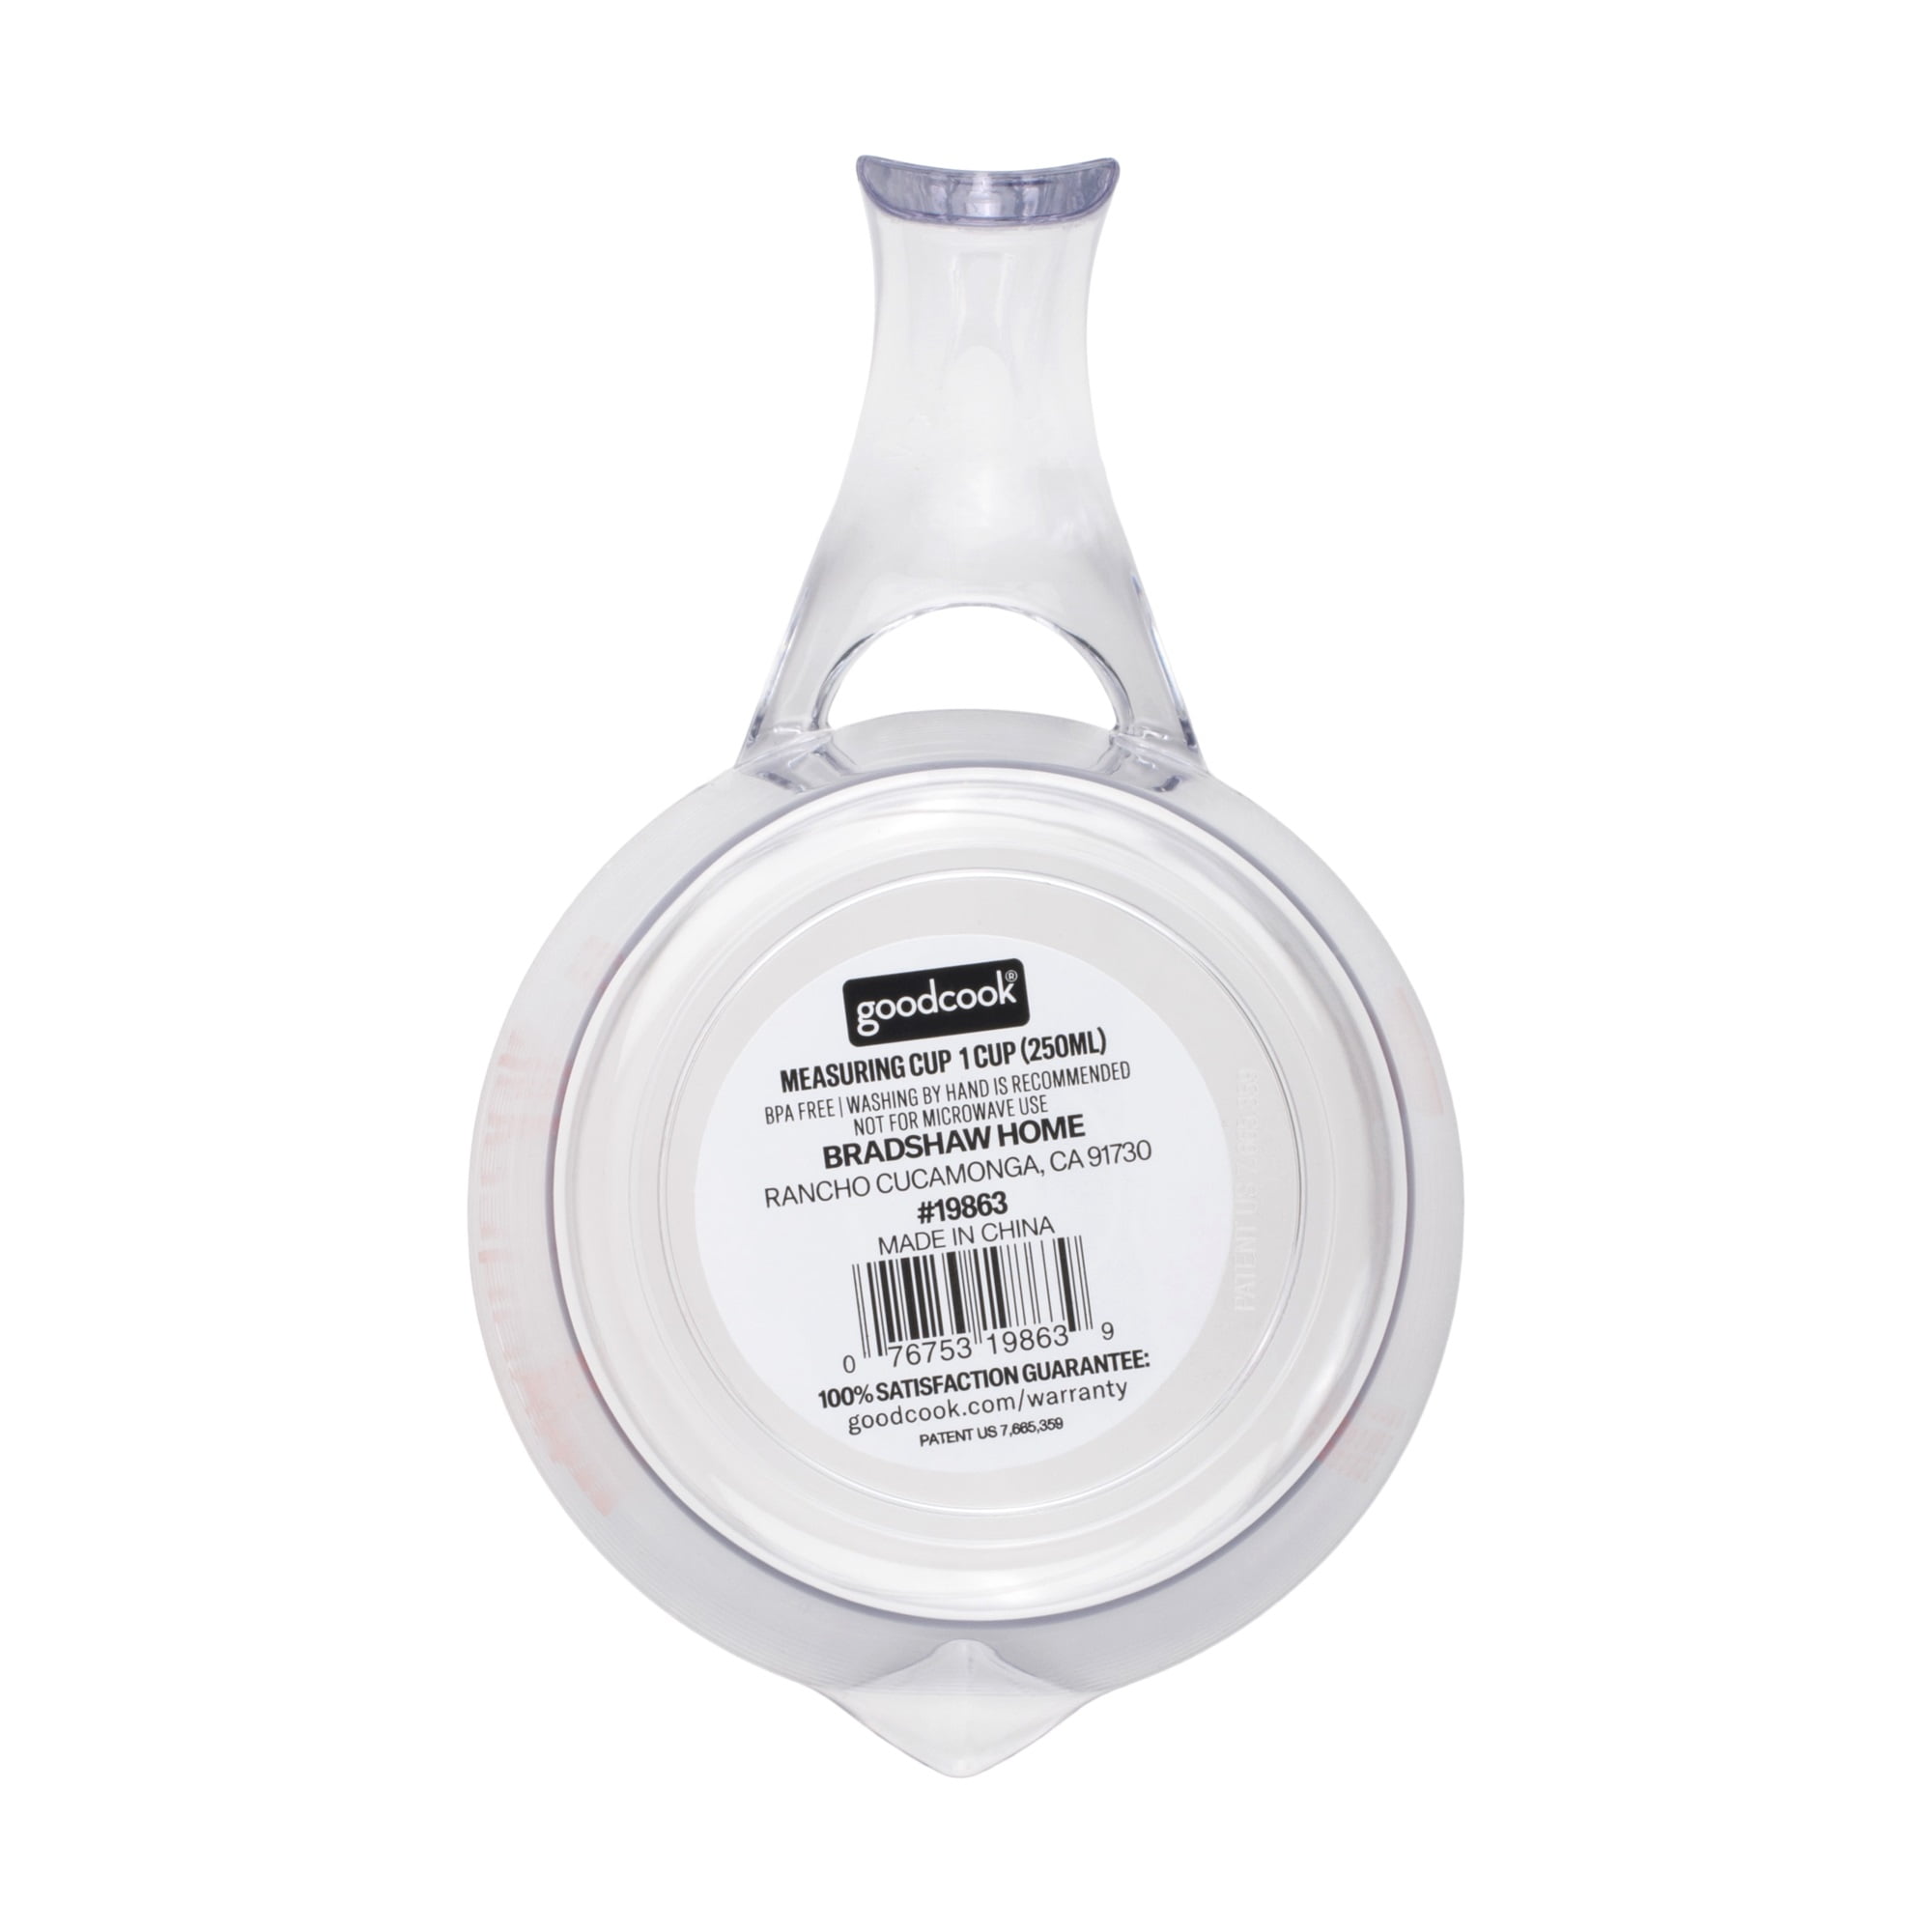 GoodCook Everyday Liquid Measuring Cup 4-Cups 